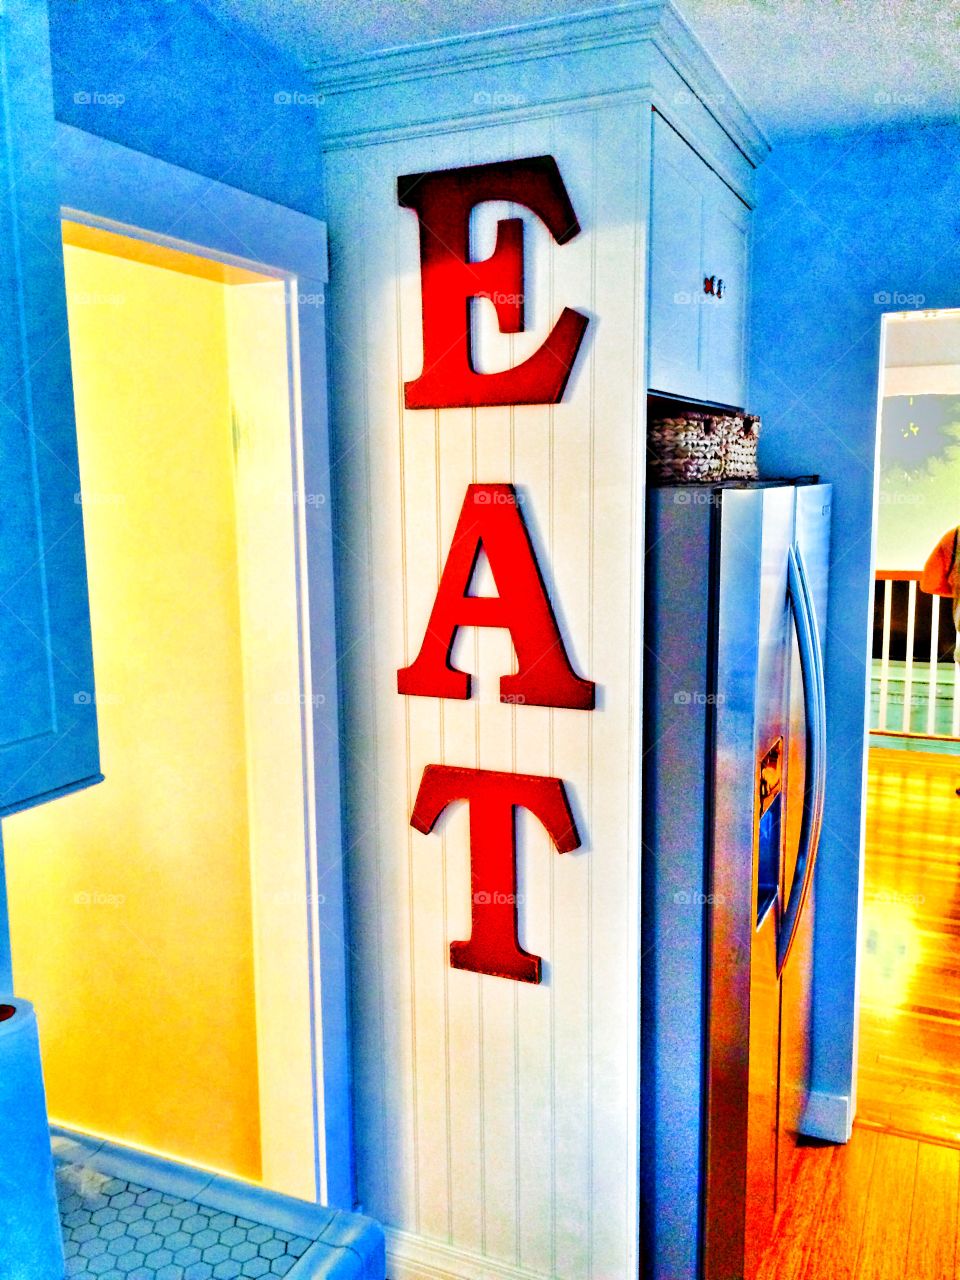 Eat sign 